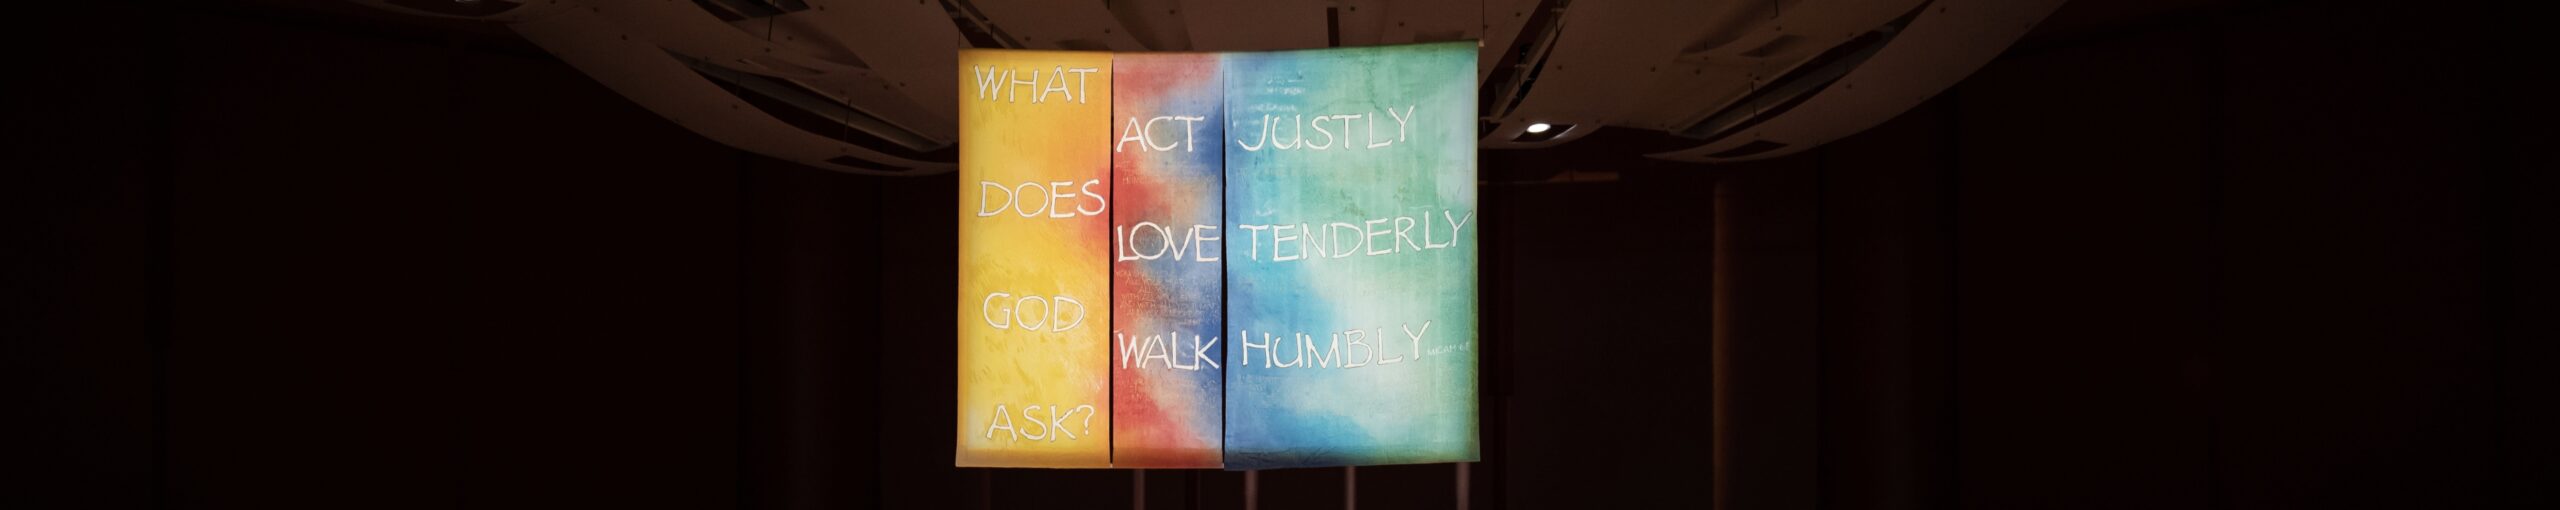 Banner with the text What does God ask? Act Justly, Love tenderly, Walk humbly